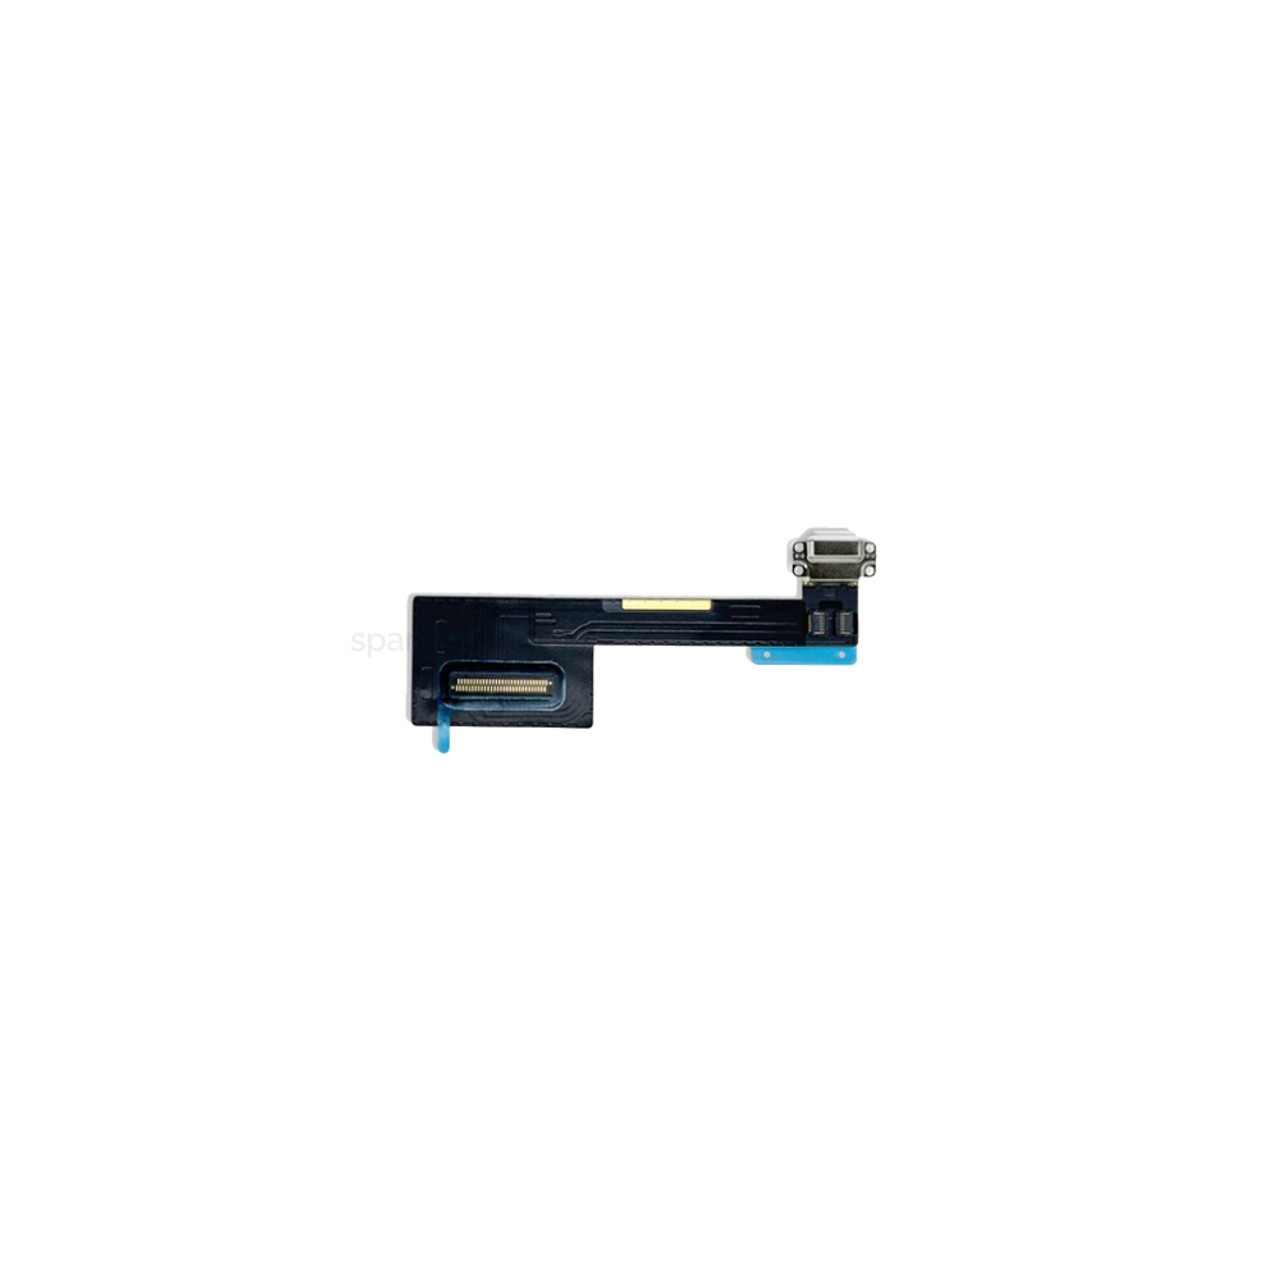 iPad Pro 9.7-inch - Charging Flex Port Replacement - White